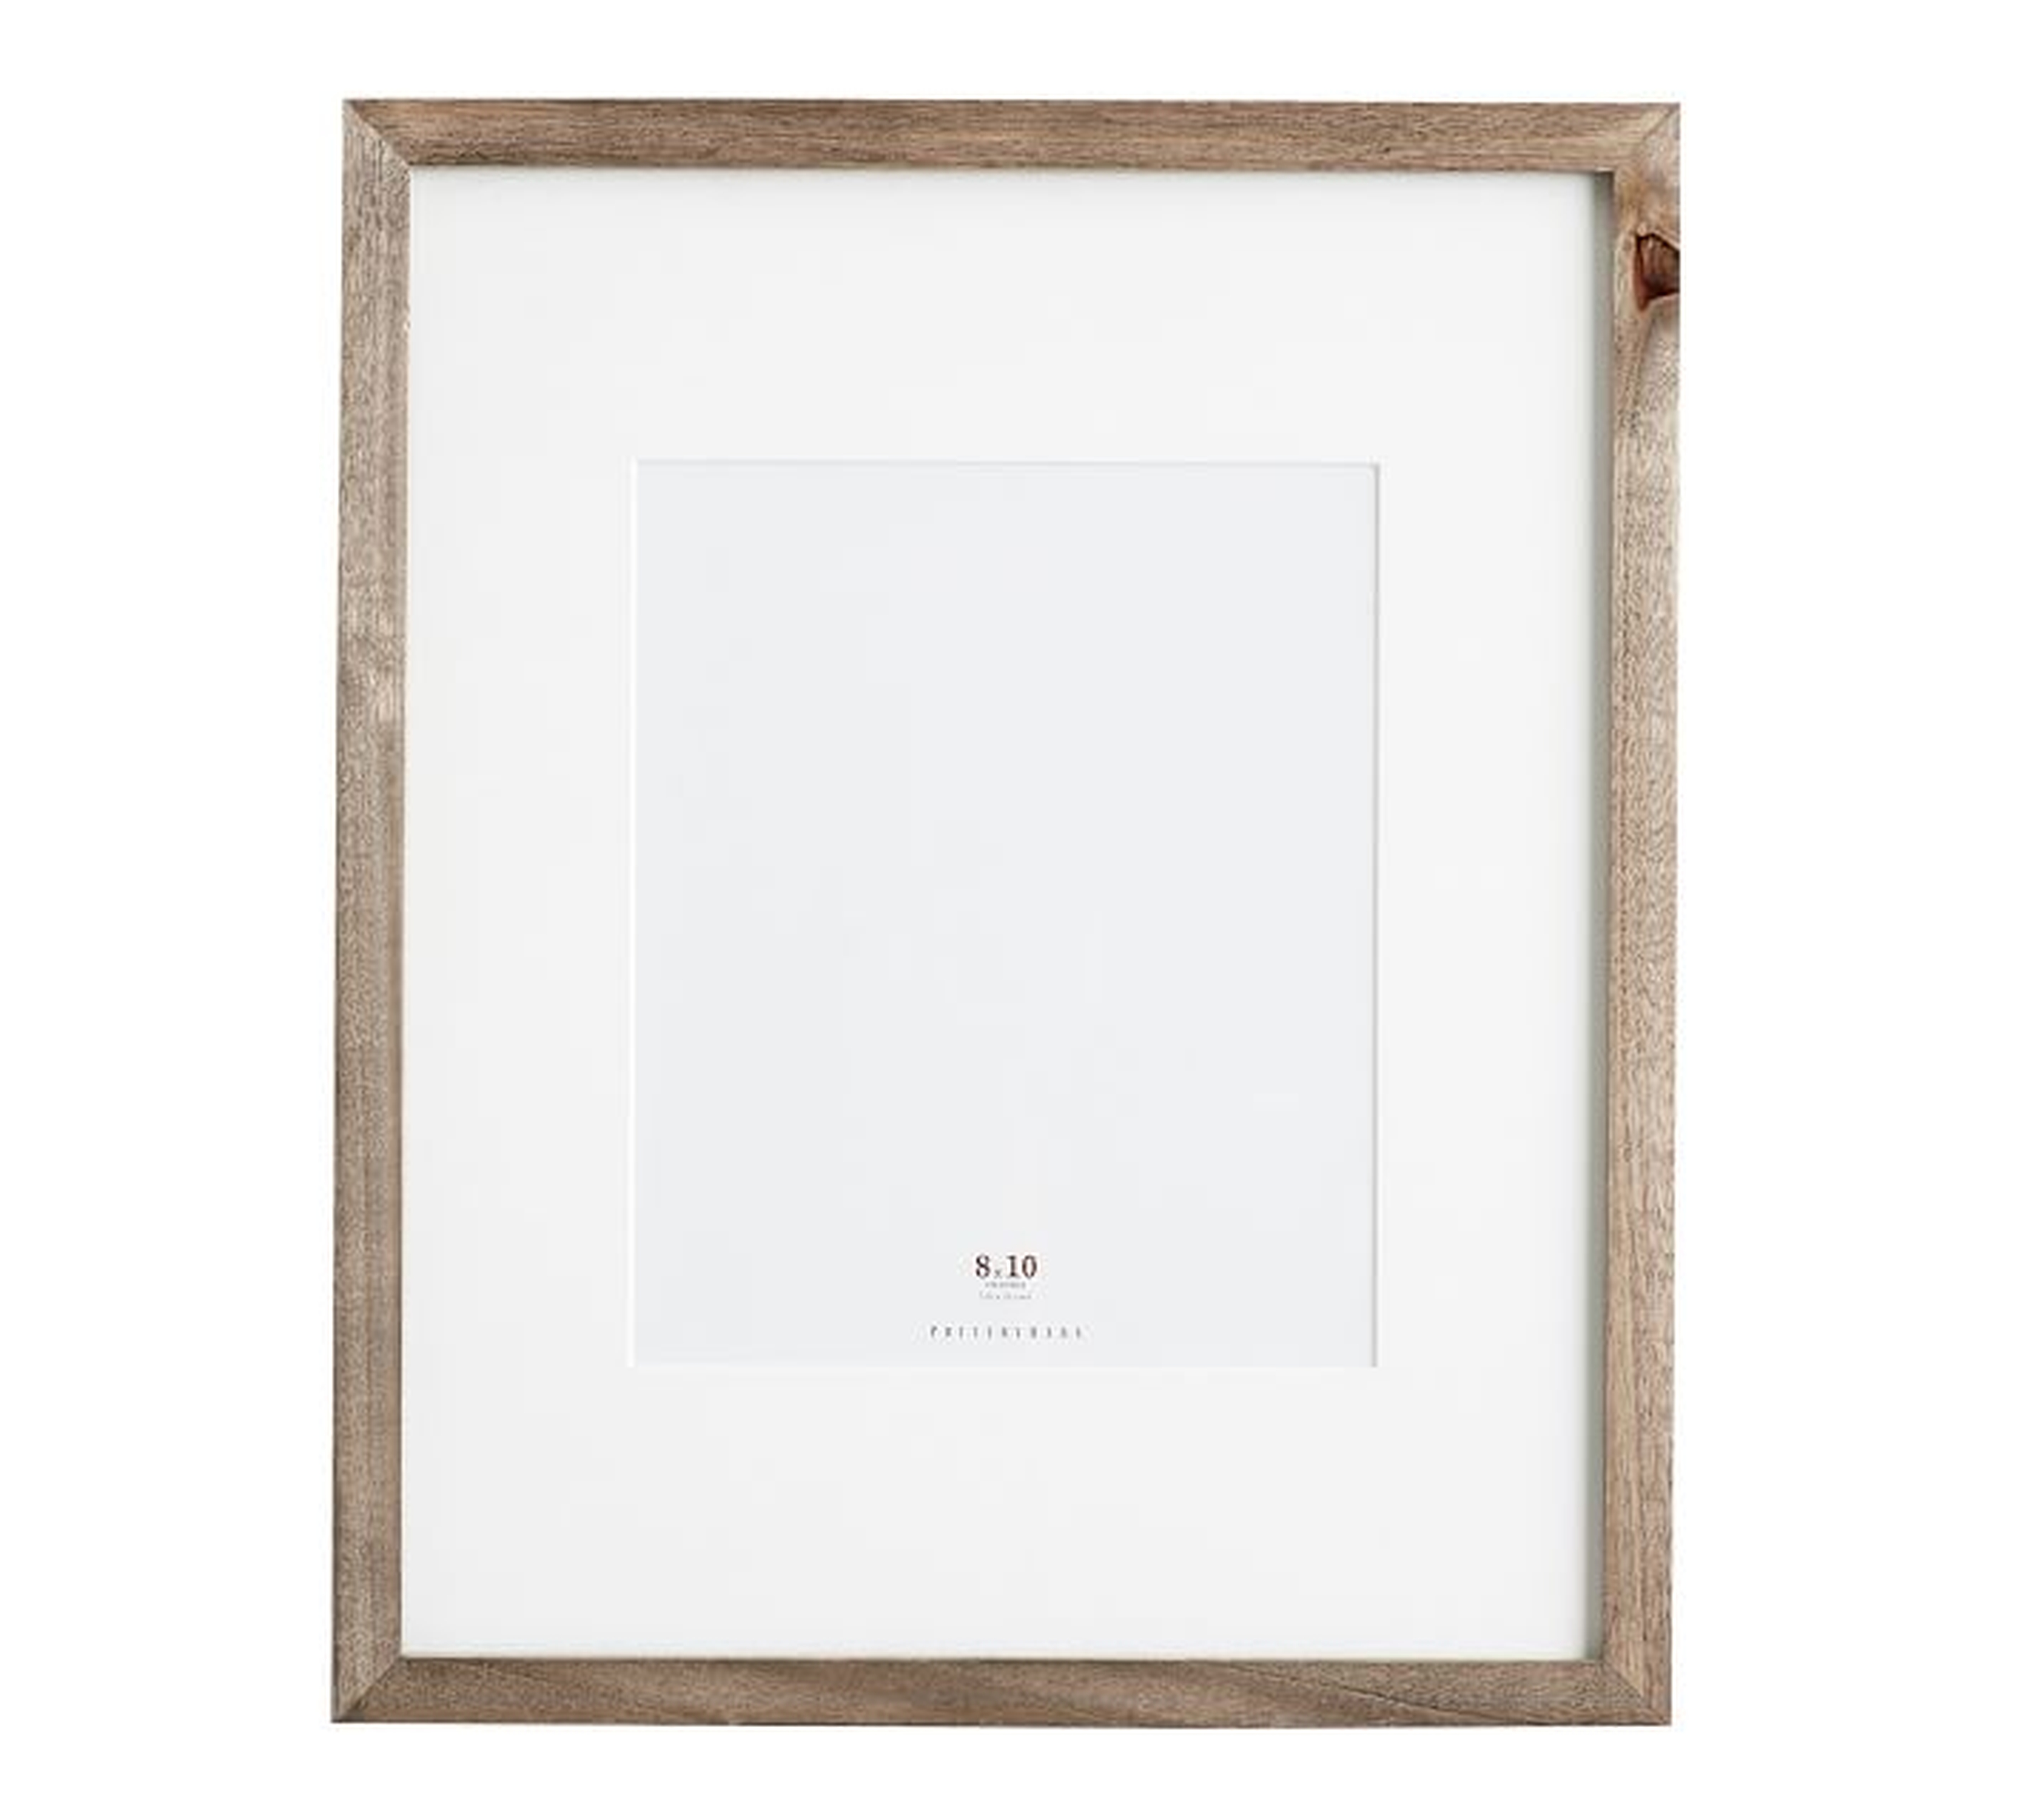 WOOD GALLERY SINGLE OPENING FRAME 8 x 10, gray - Pottery Barn